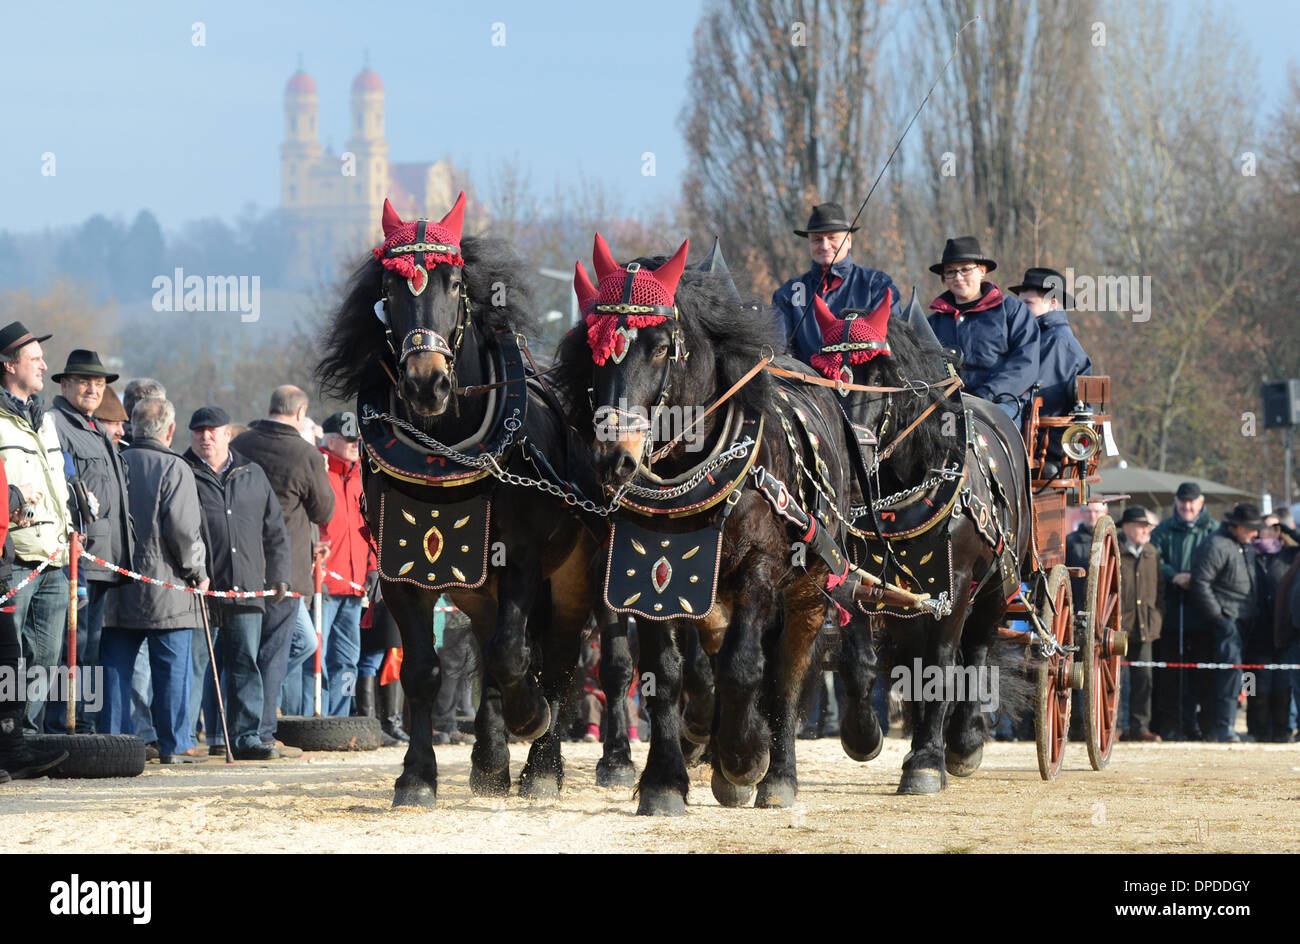 Ellwangen, Germany. 13th Jan, 2014. Anton Schiele presents a four-in-hand drawn by Noriker horses during the horse and carriage prize at the 'Kalter Markt' (lit. cold market) horse market in Ellwangen, Germany, 13 January 2014. Since the 17th century the 'Kalter Markt' horse market annualy takes place on the first monday after Epiphany. A big parade and the awarding of a prize for horses and carriages are part of the event. Photo: FRANZISKA KRAUFMANN/Dpa/Alamy Live News Stock Photo